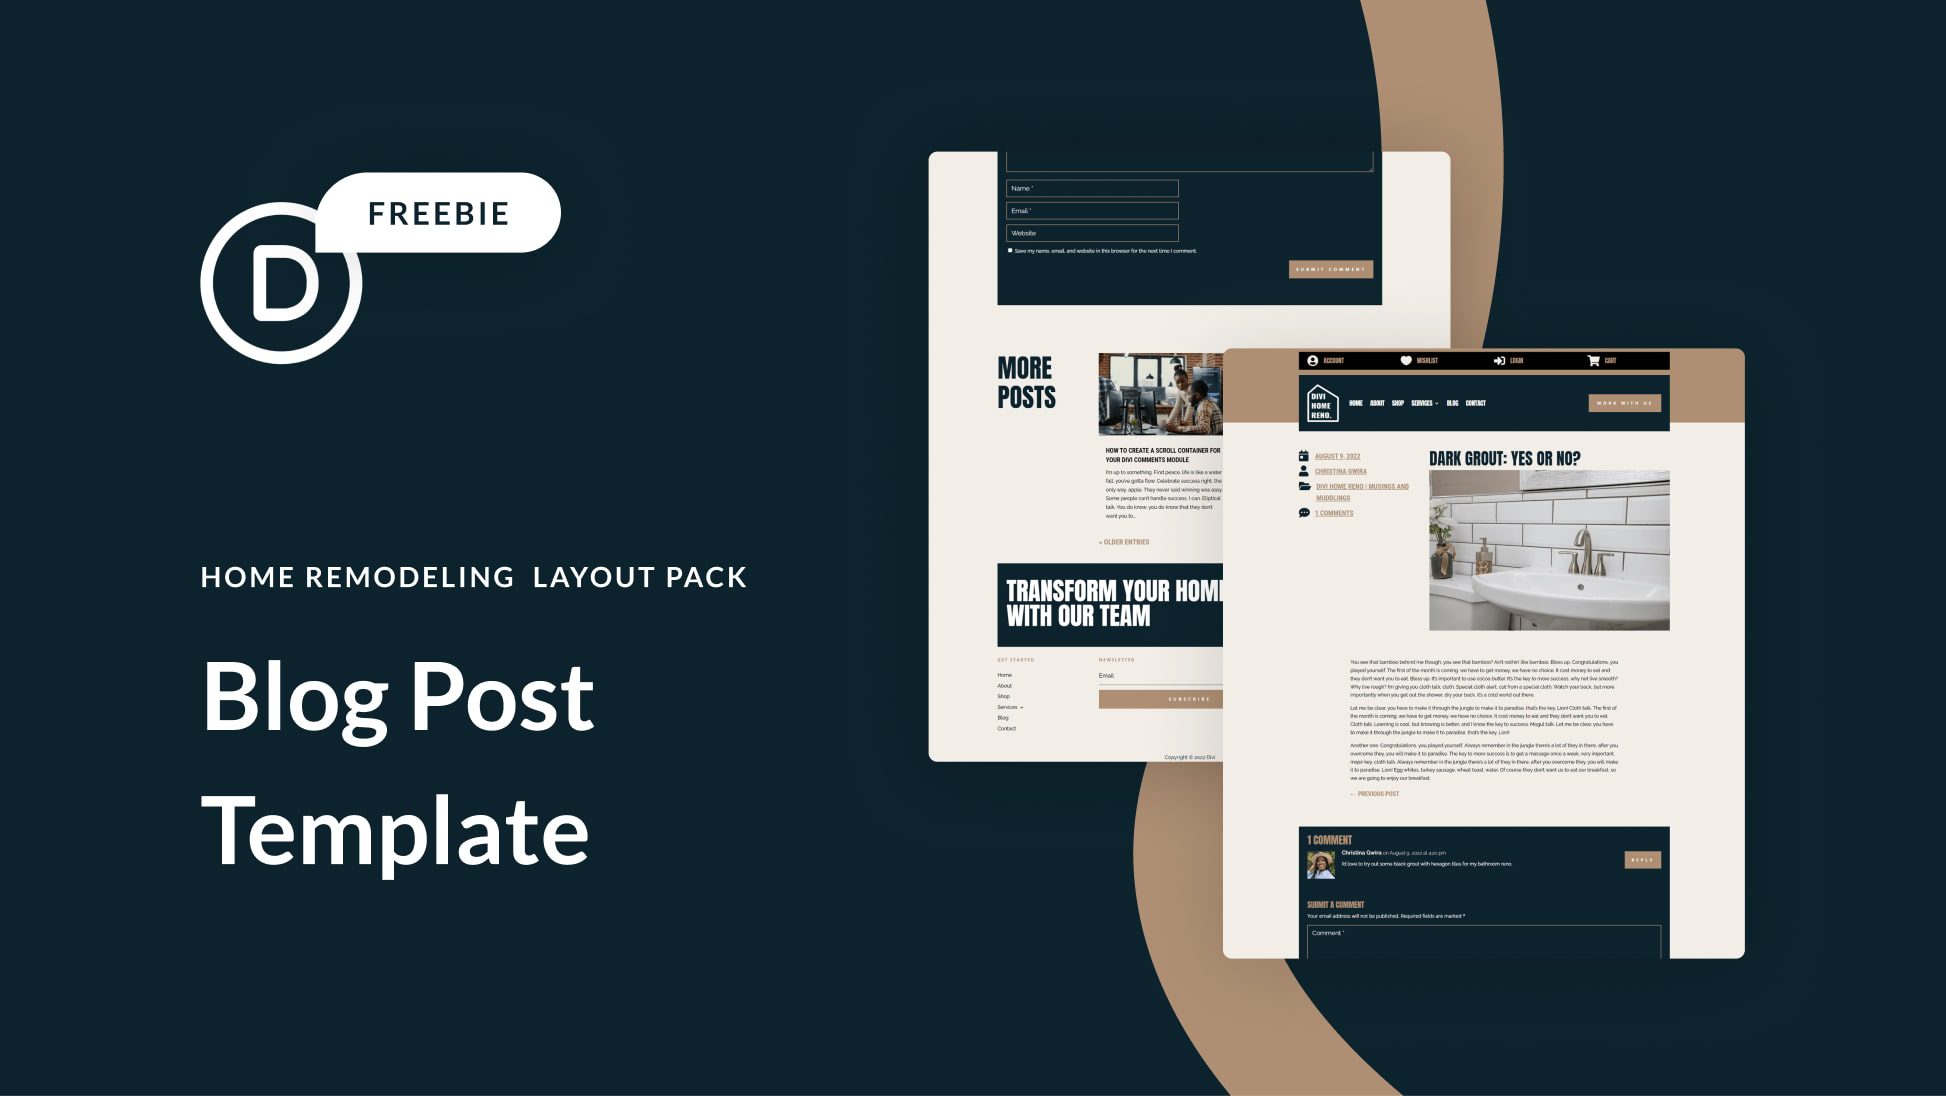 Download a FREE Blog Post Template for Divi’s Home Remodeling Layout Pack